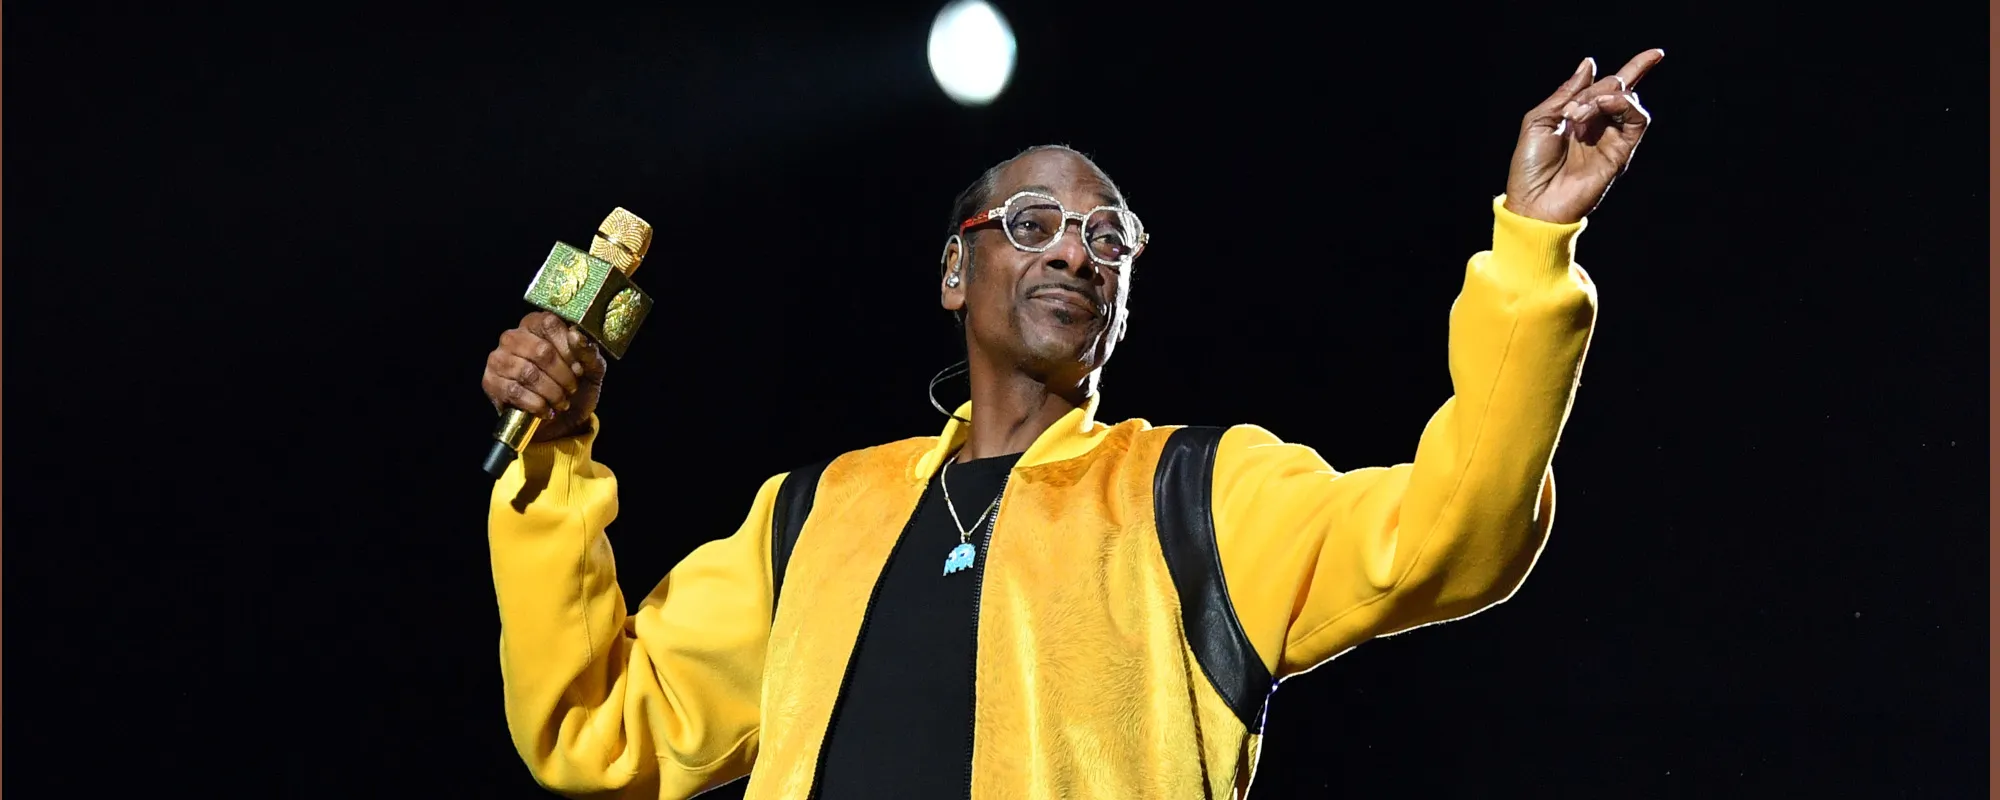 Behind the Meaning of Snoop Dogg and Pharrell’s “Drop It Like It’s Hot”